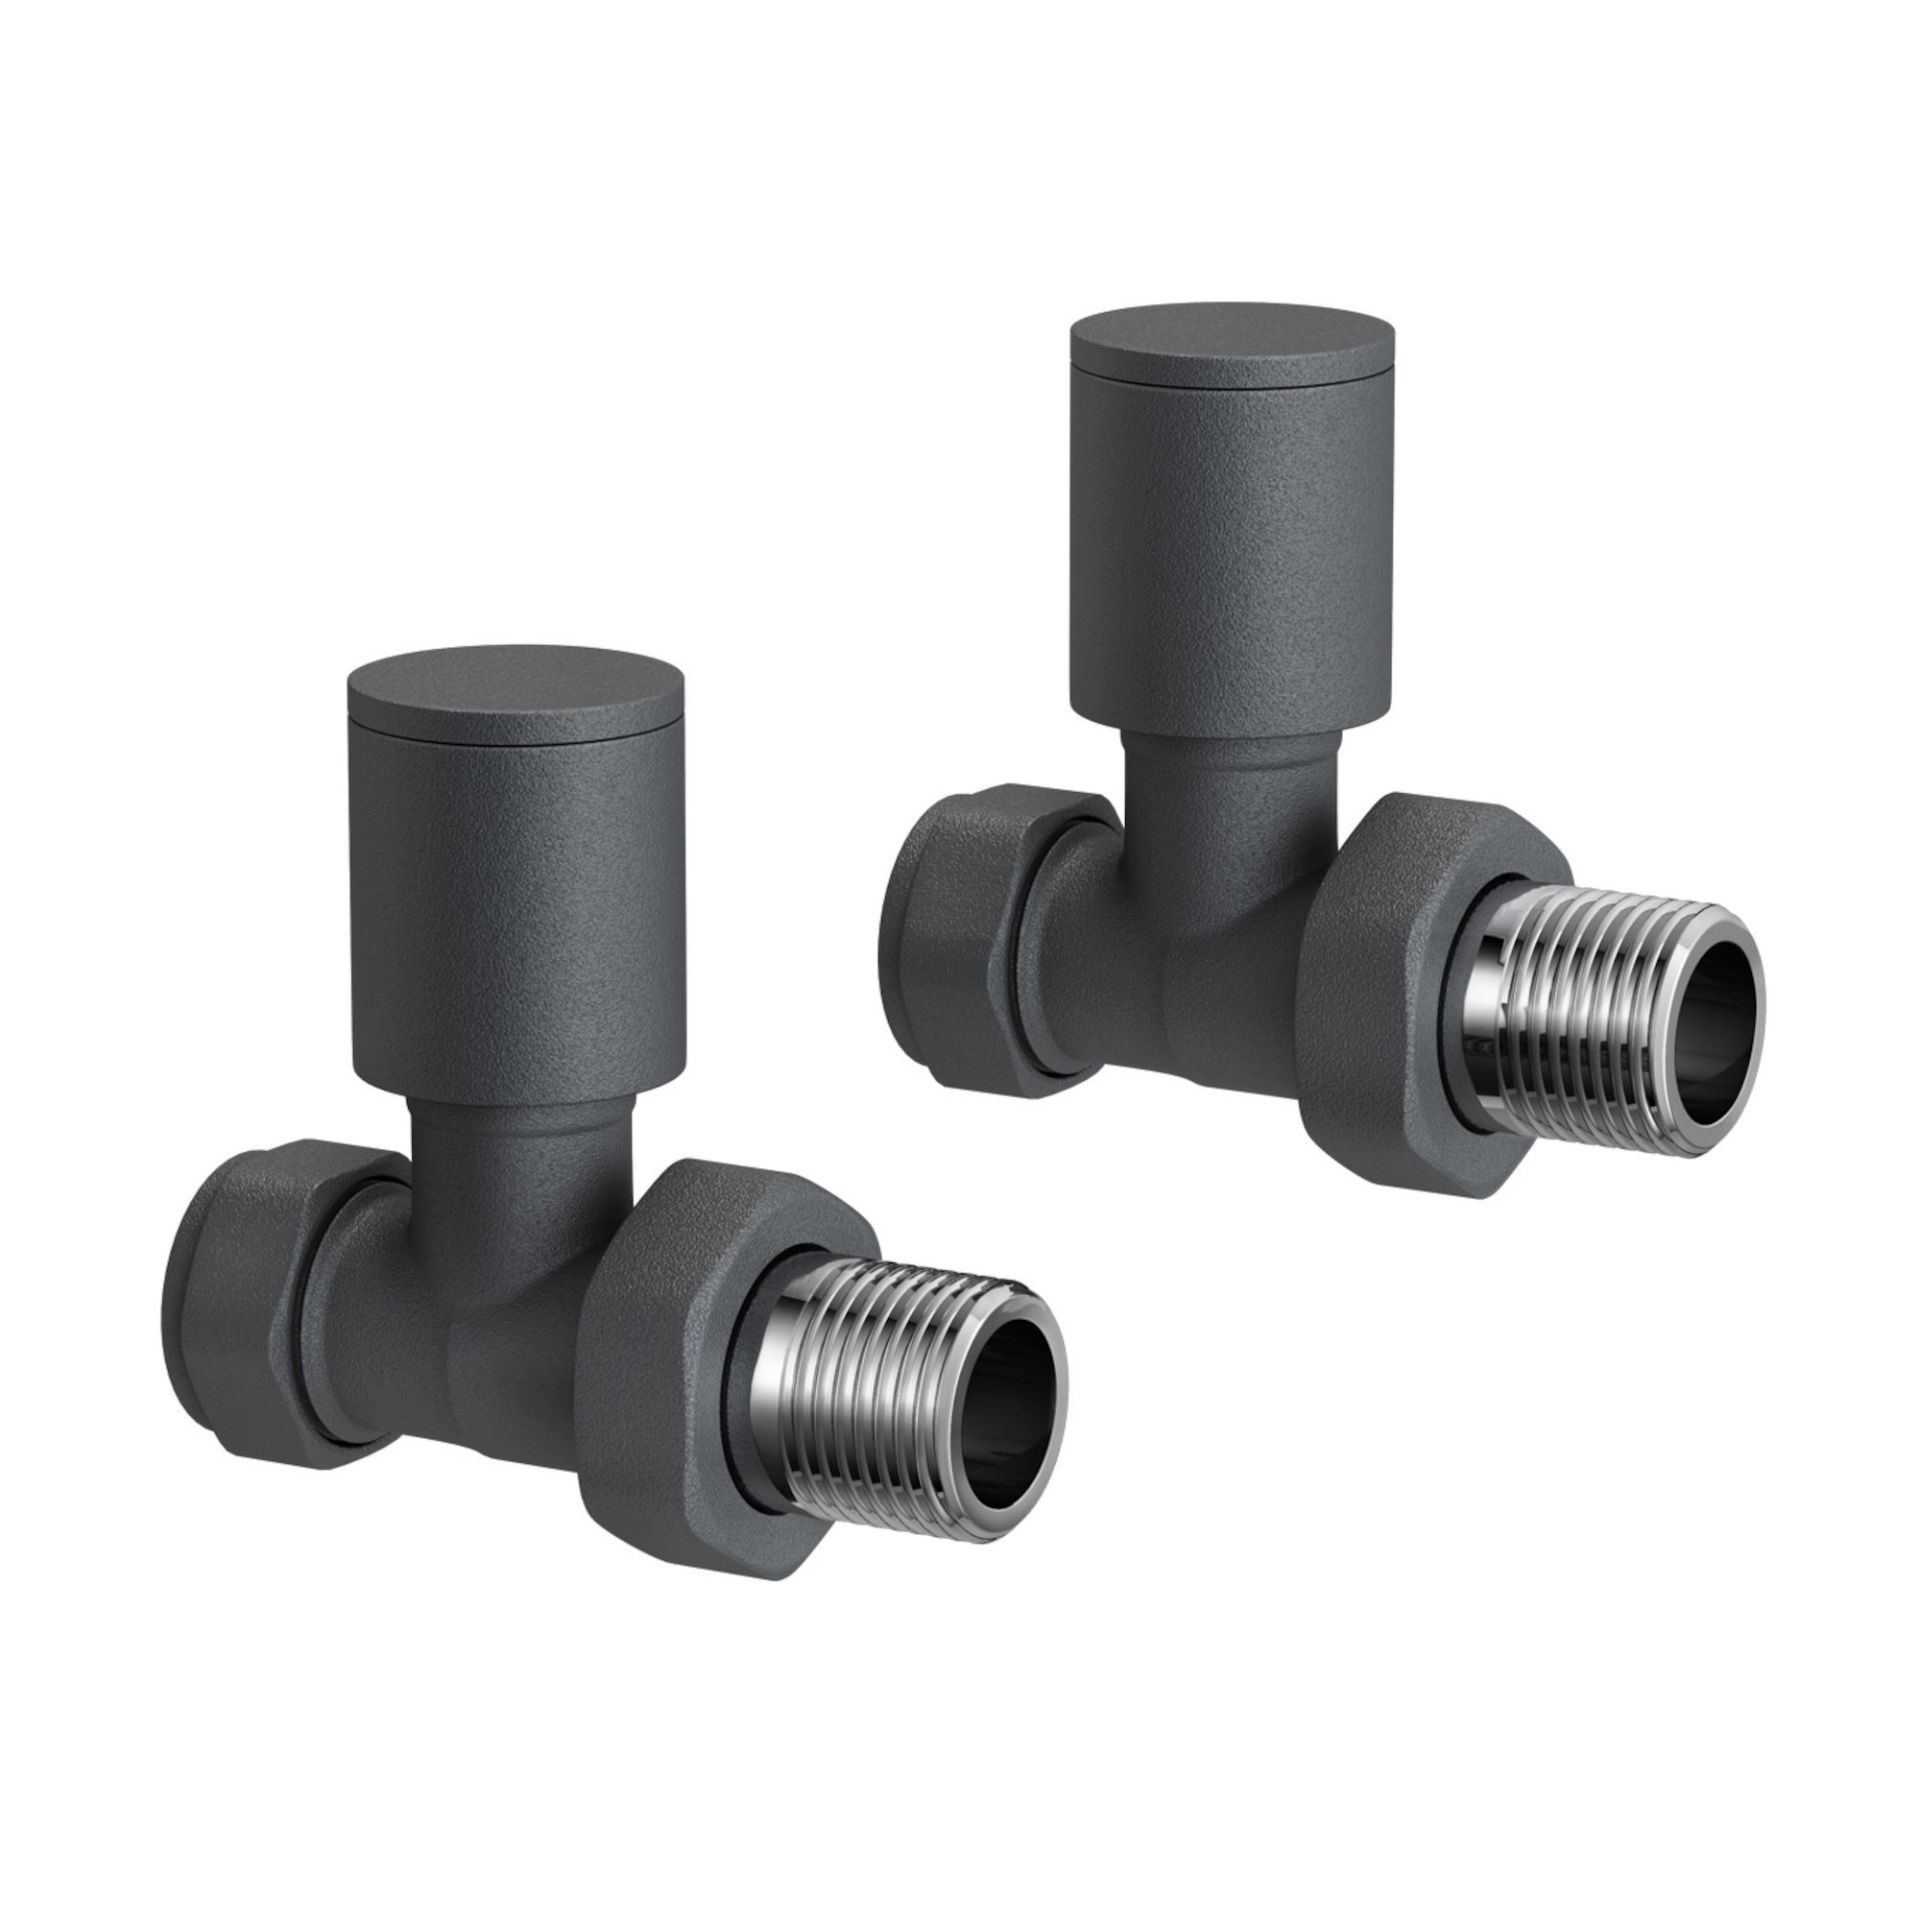 (MP65) Anthracite Standard Connection Straight Radiator Valves 15mm Contemporary anthracite finish